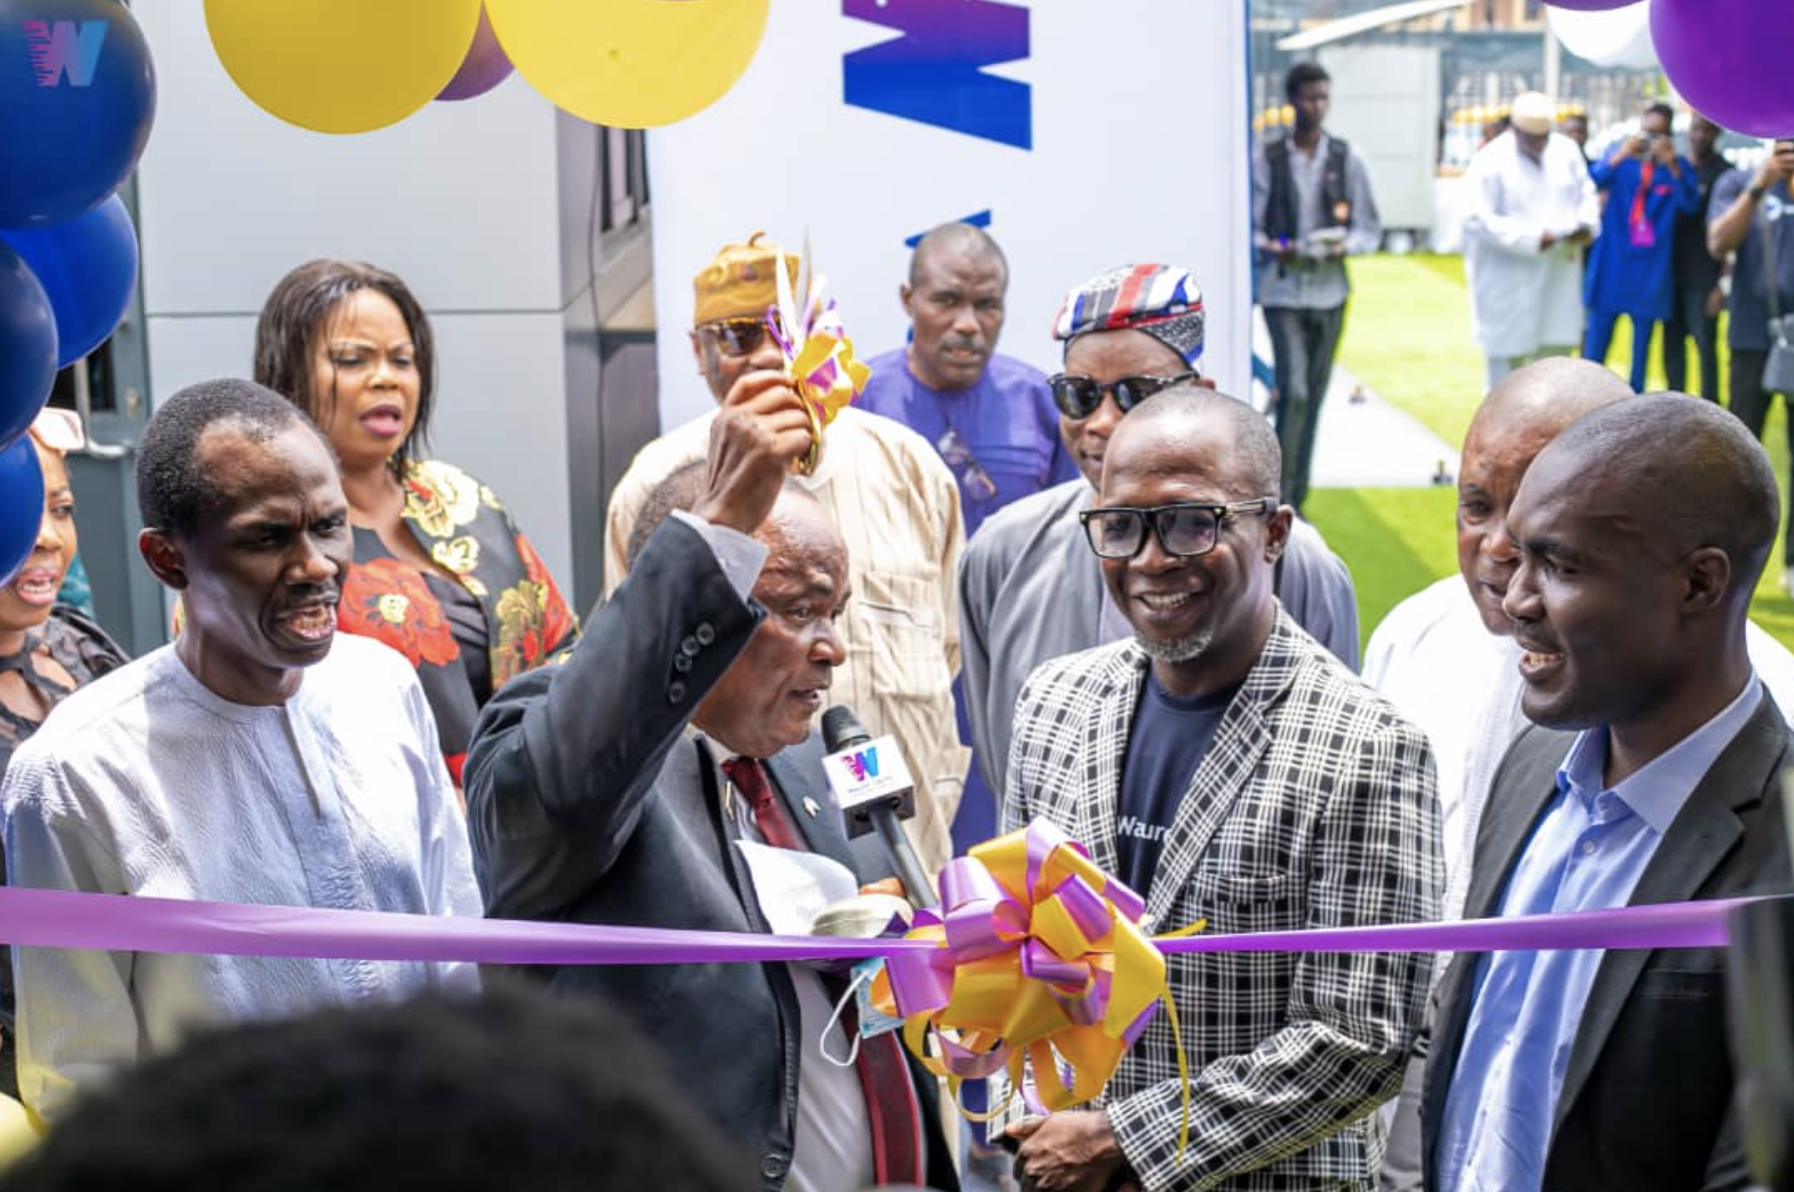 Walure Capital launches tech hub in Lagos, plans to replicate same in other states